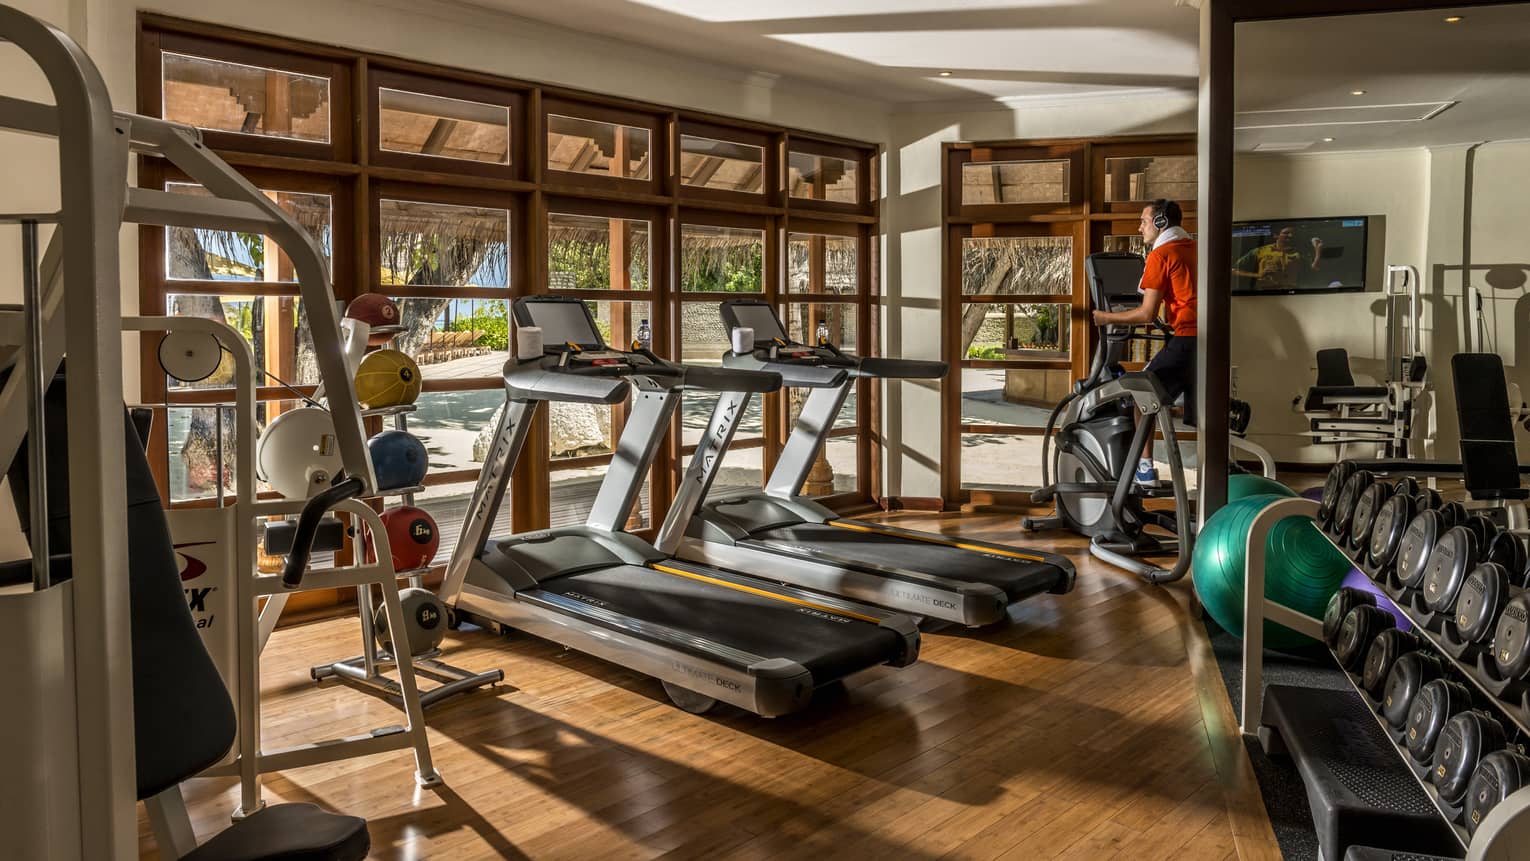 Gym with wooden floors, two treadmills, person on elliptical, free wights, windows looking out to beach